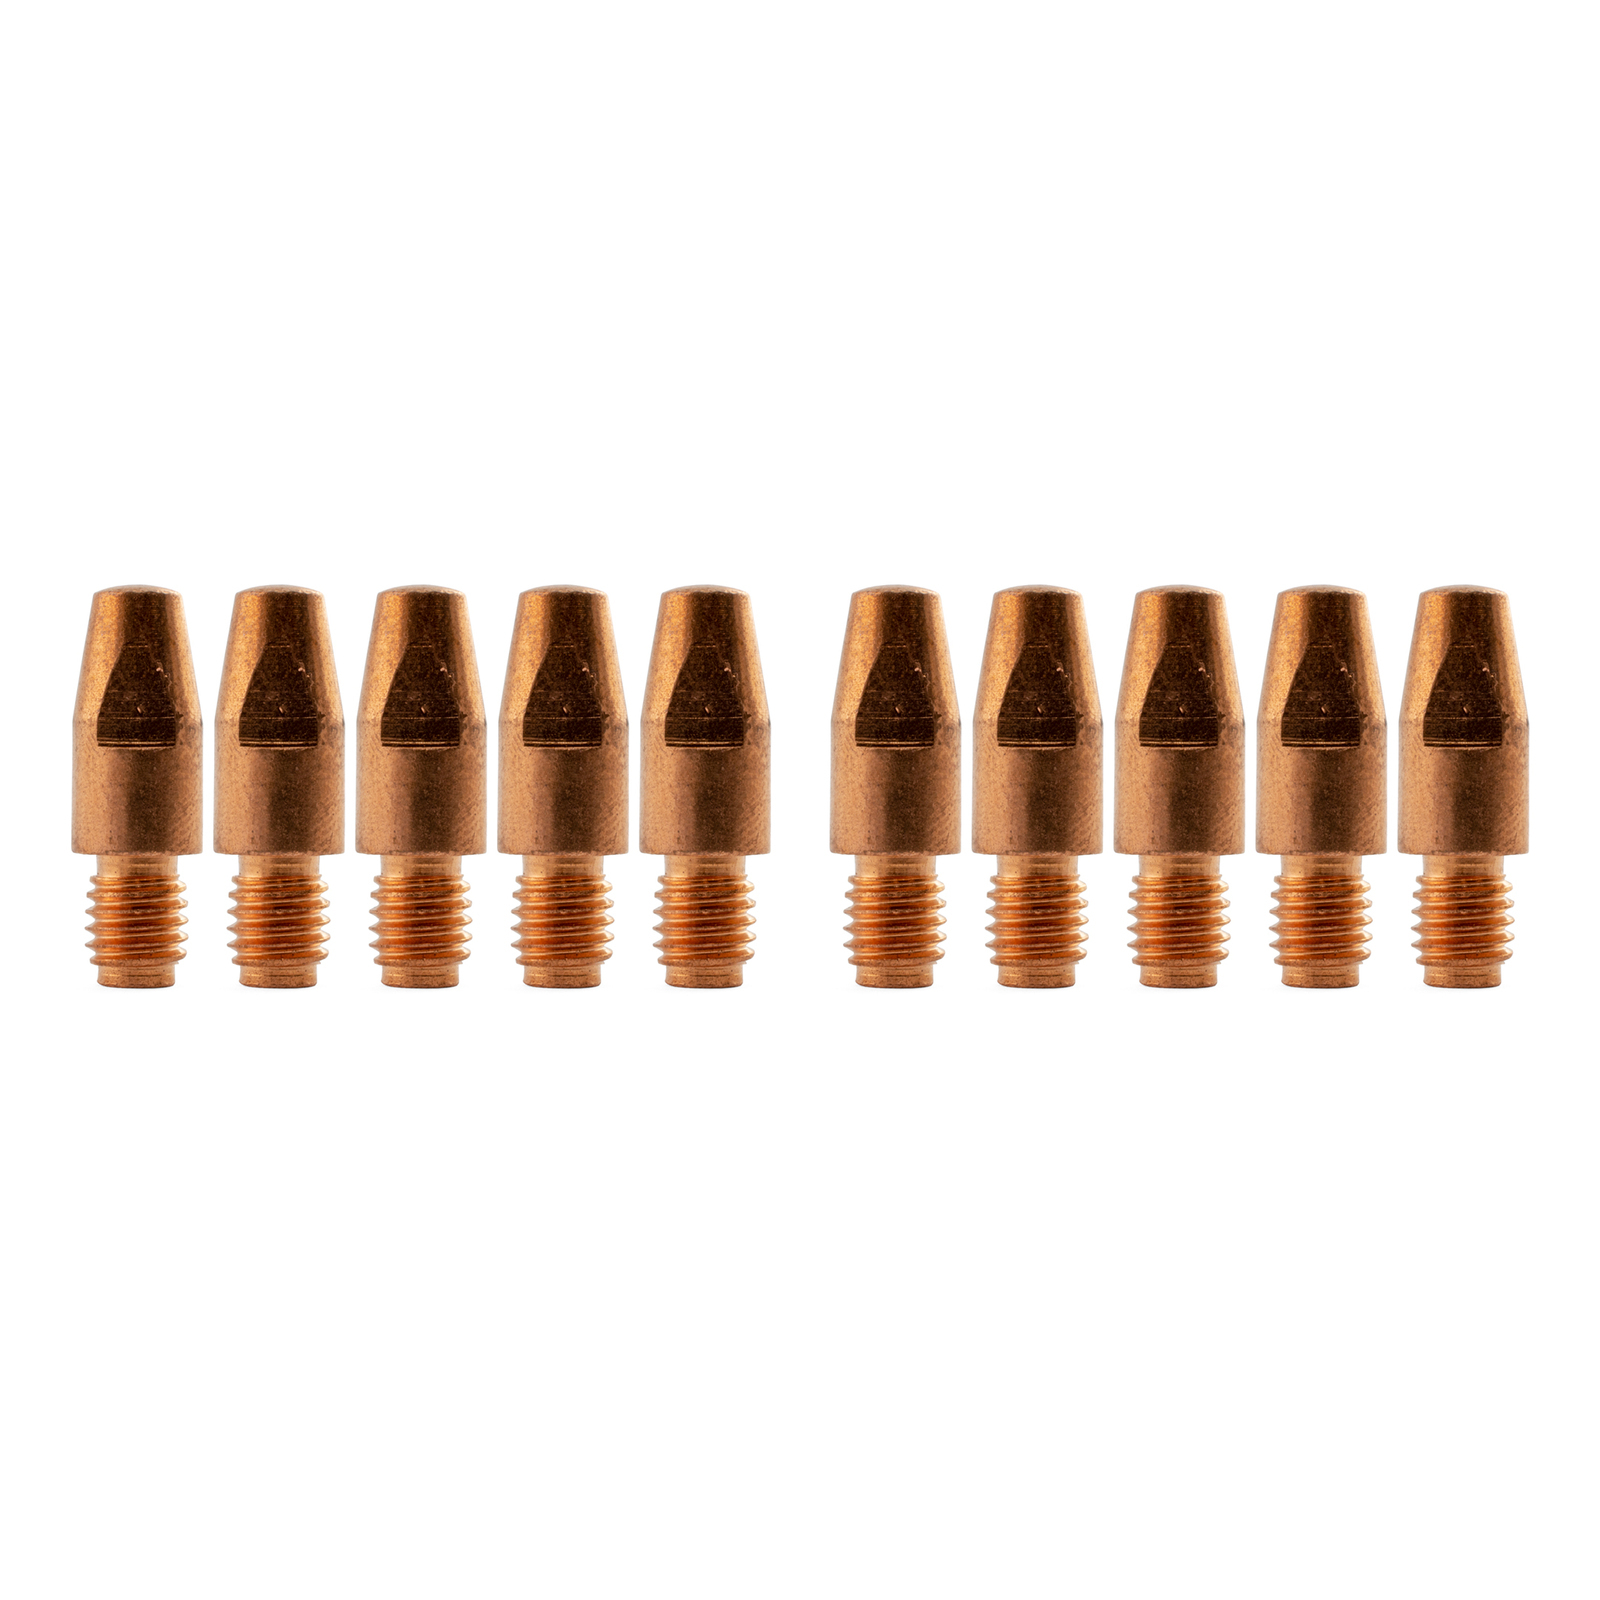 Binzel Style MIG Contact Tips for 2.4mm Aluminum Wire - 10 each - M8 x 10mm x 2.4mm